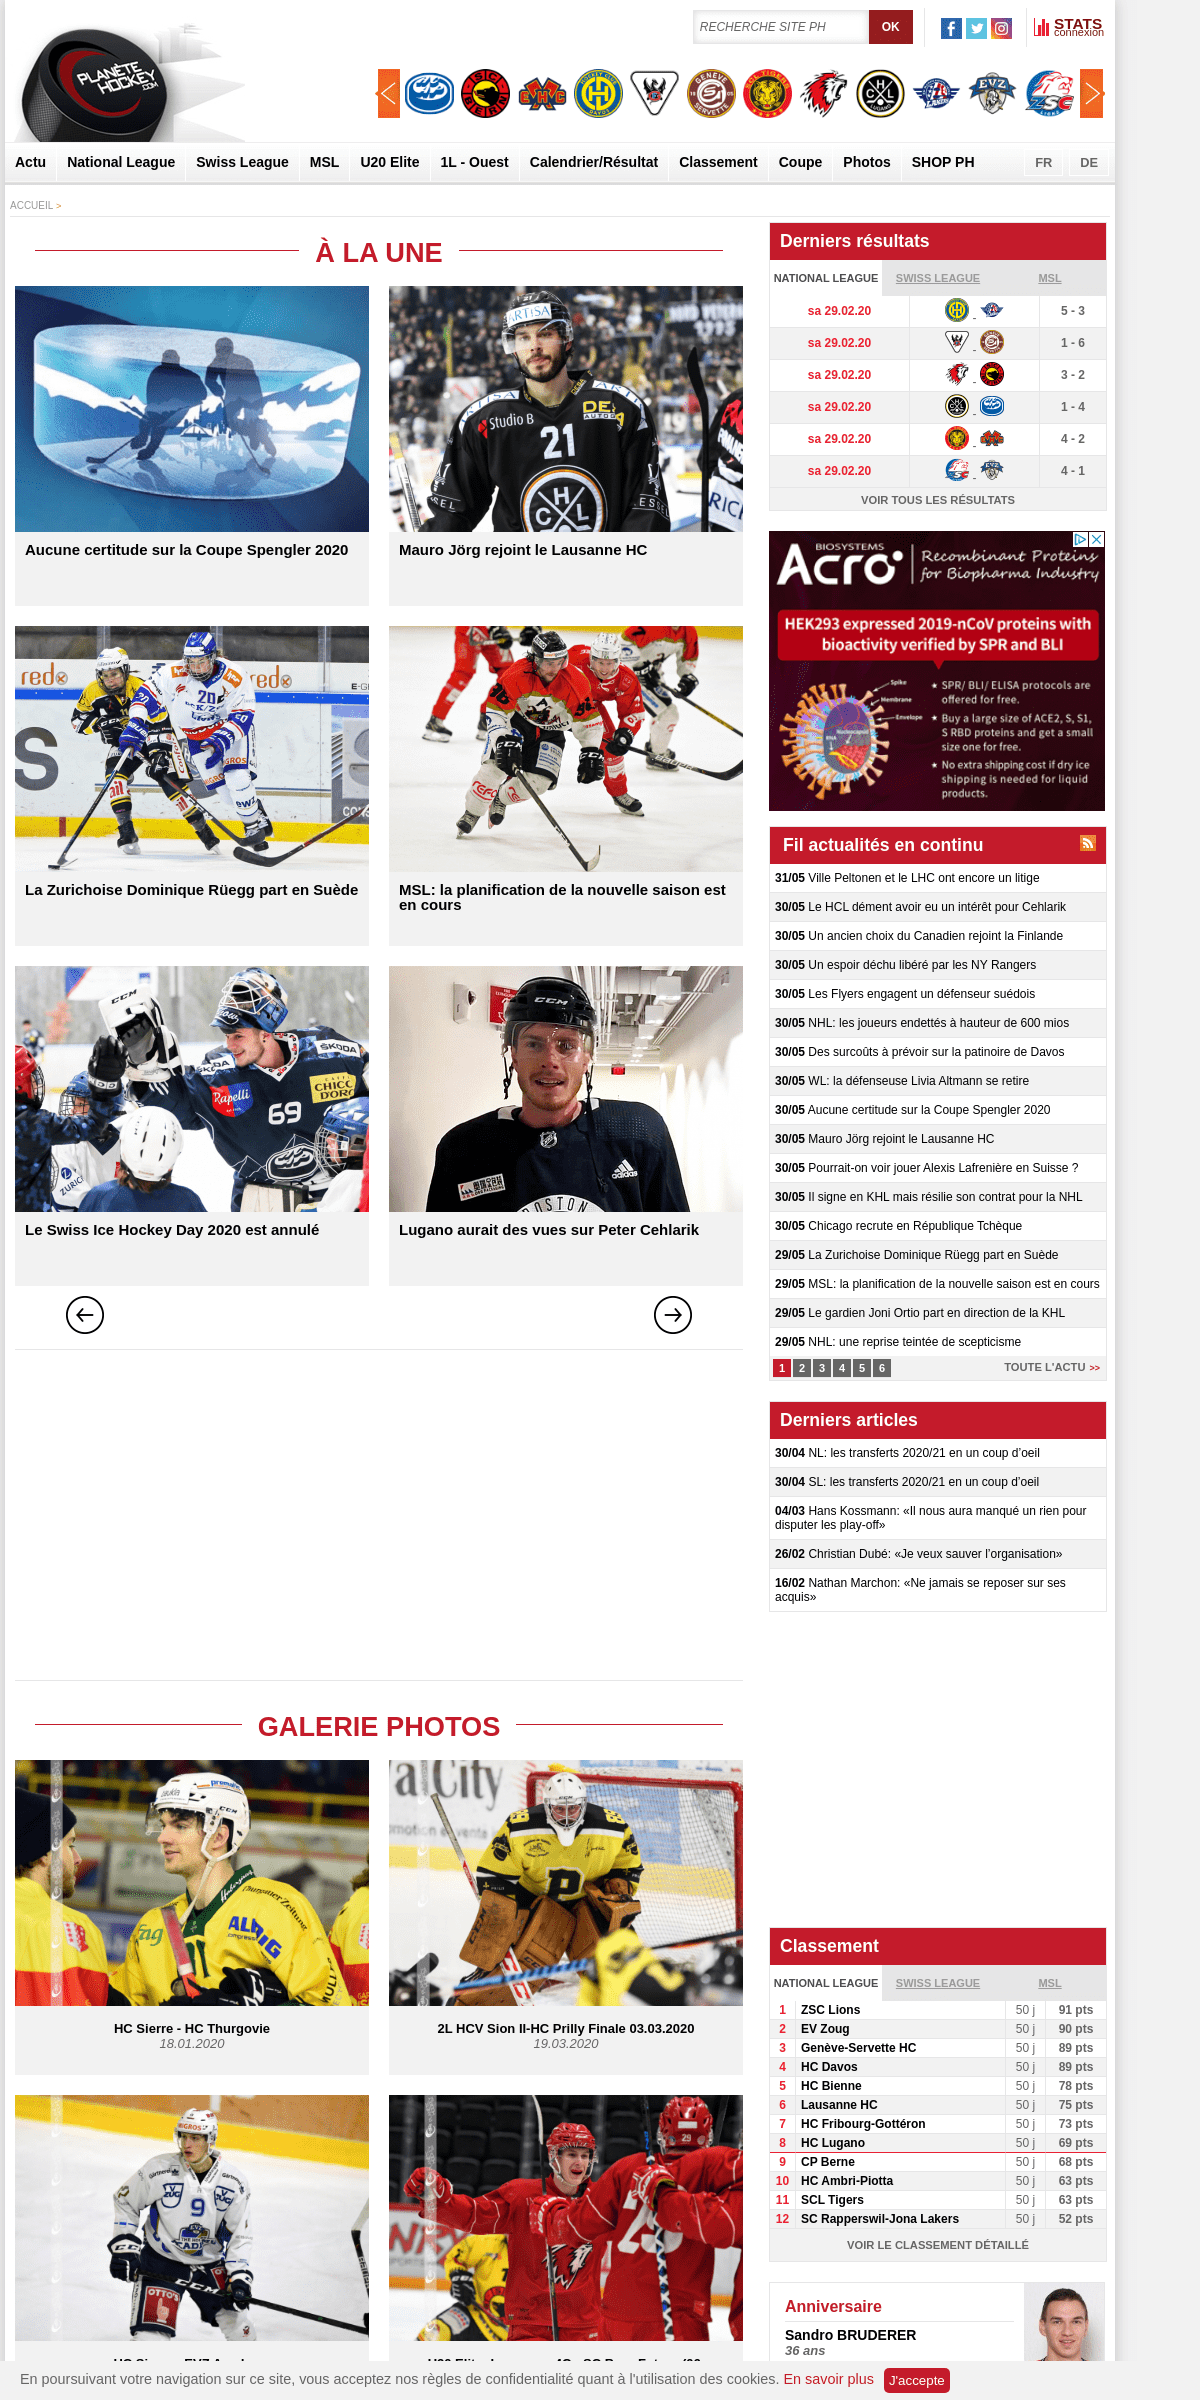 A complete backup of planetehockey.com